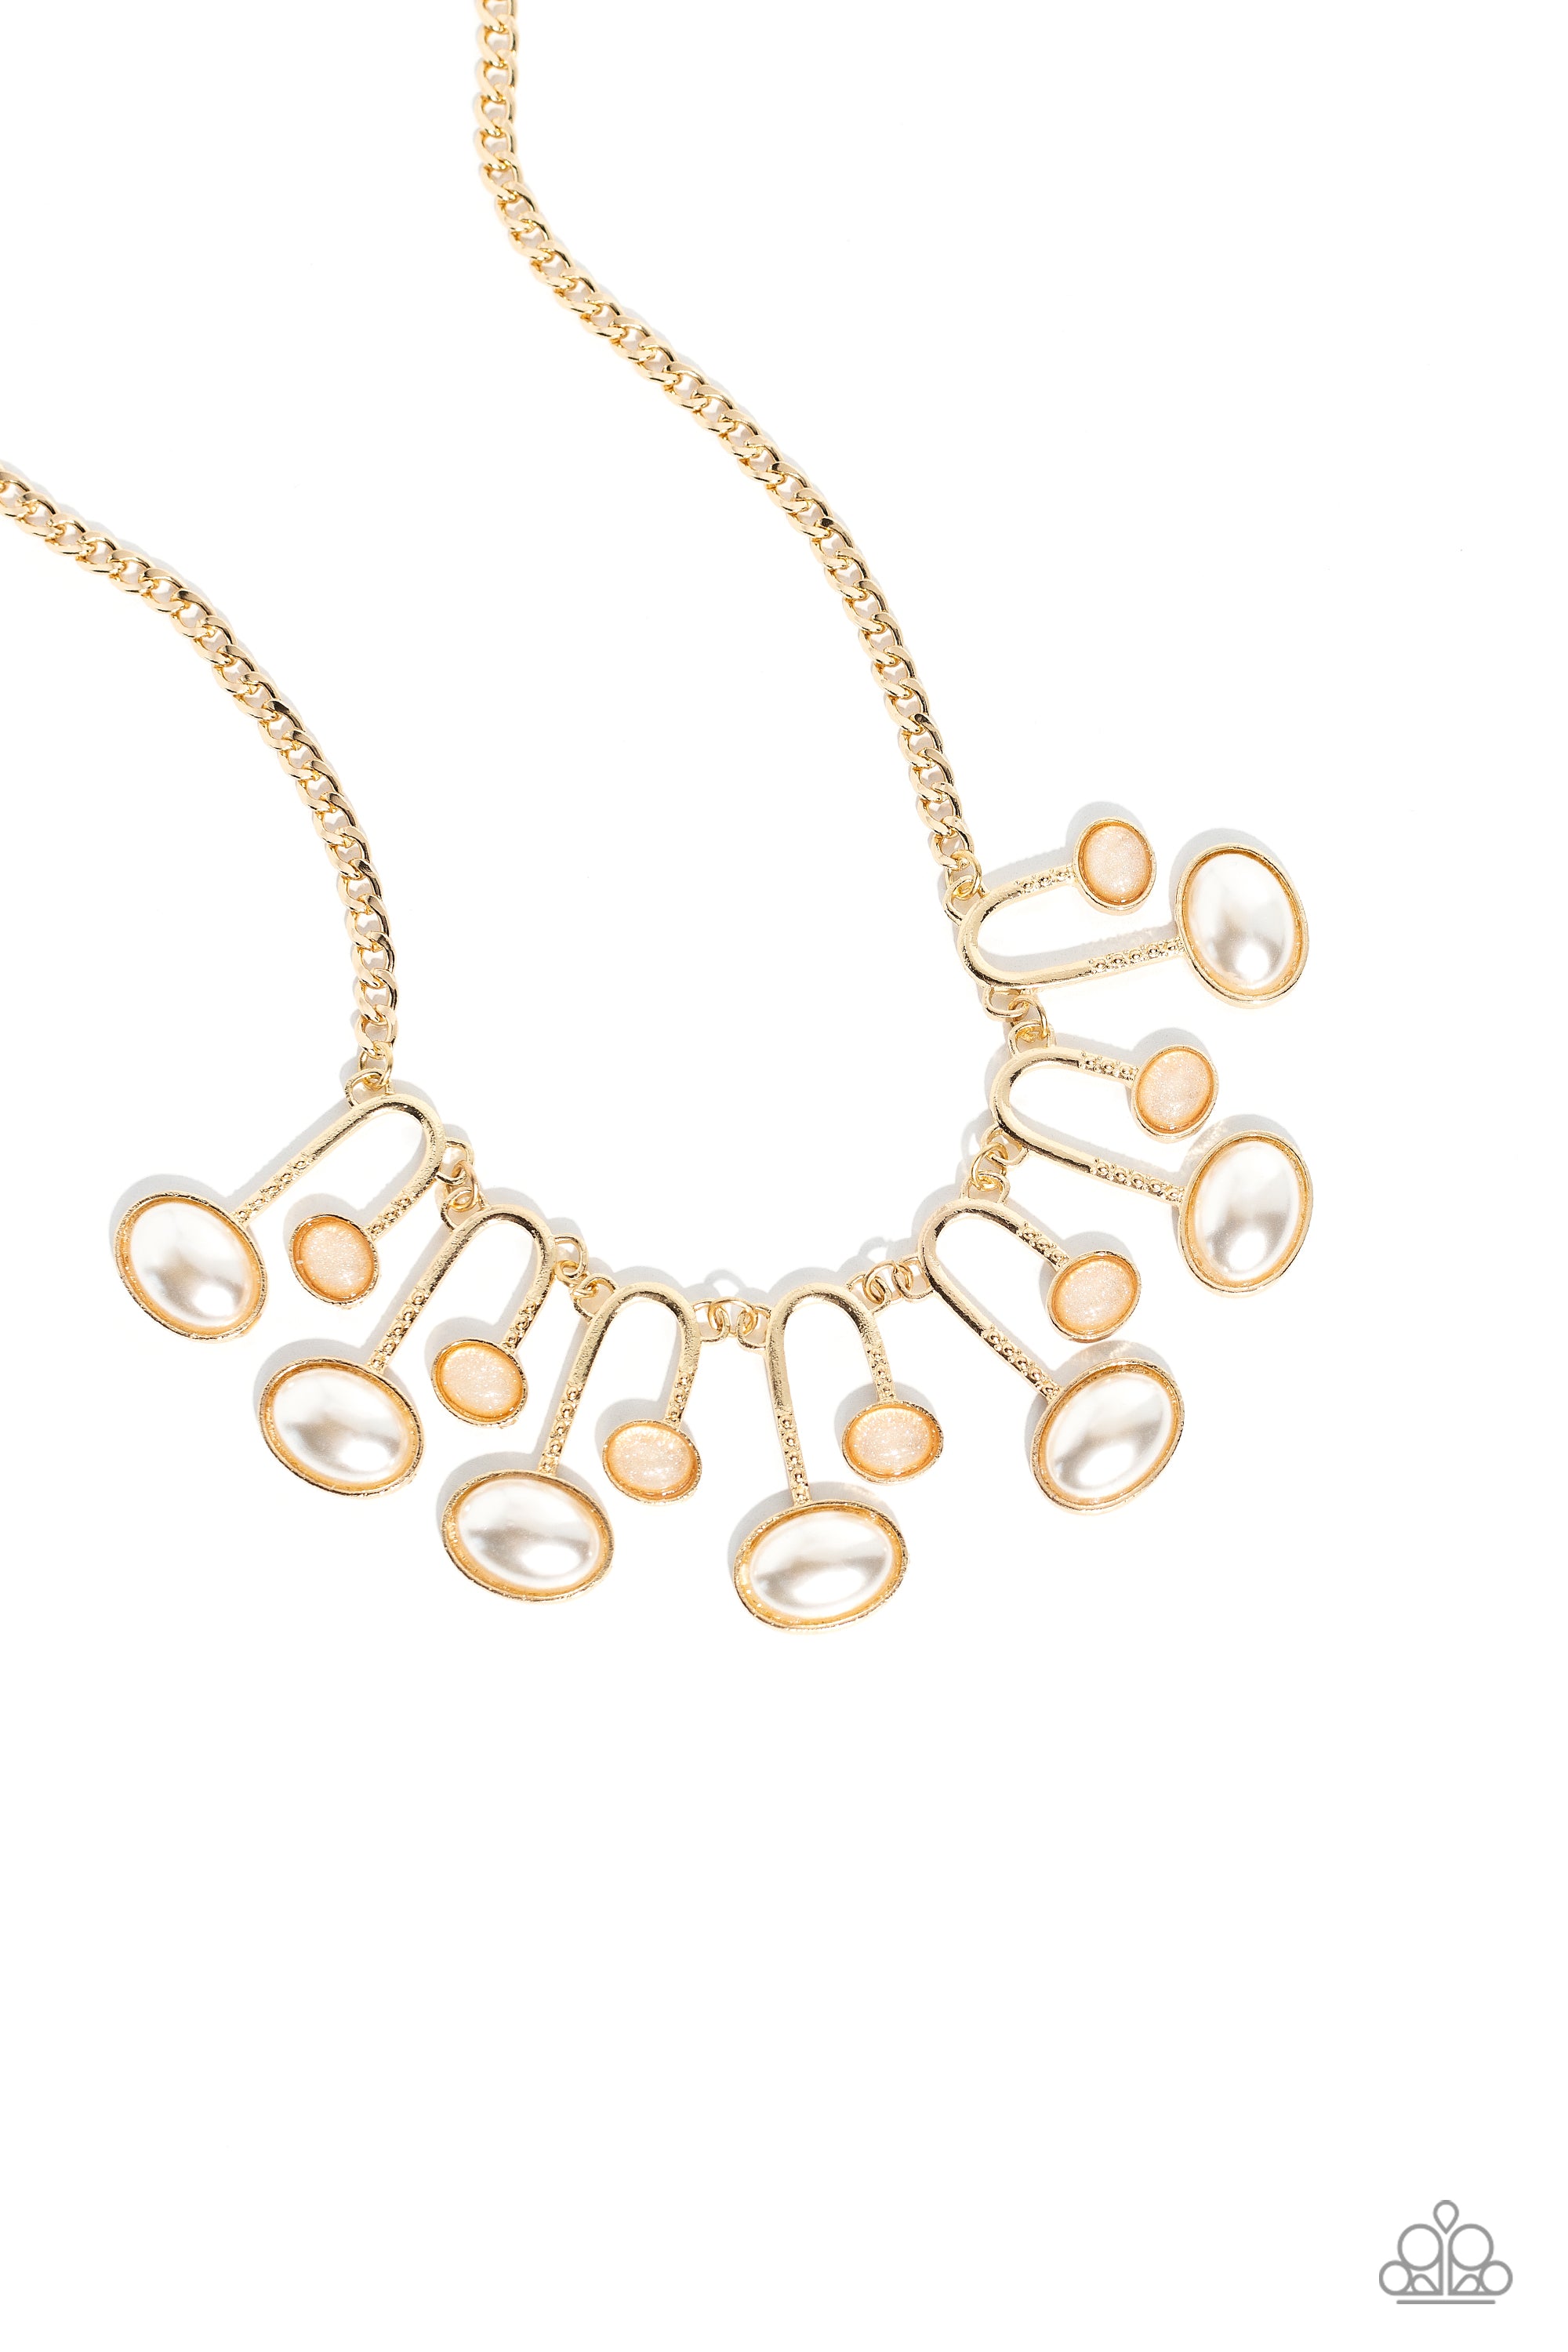 ABSTRACT ADORNMENT GOLD-NECKLACE